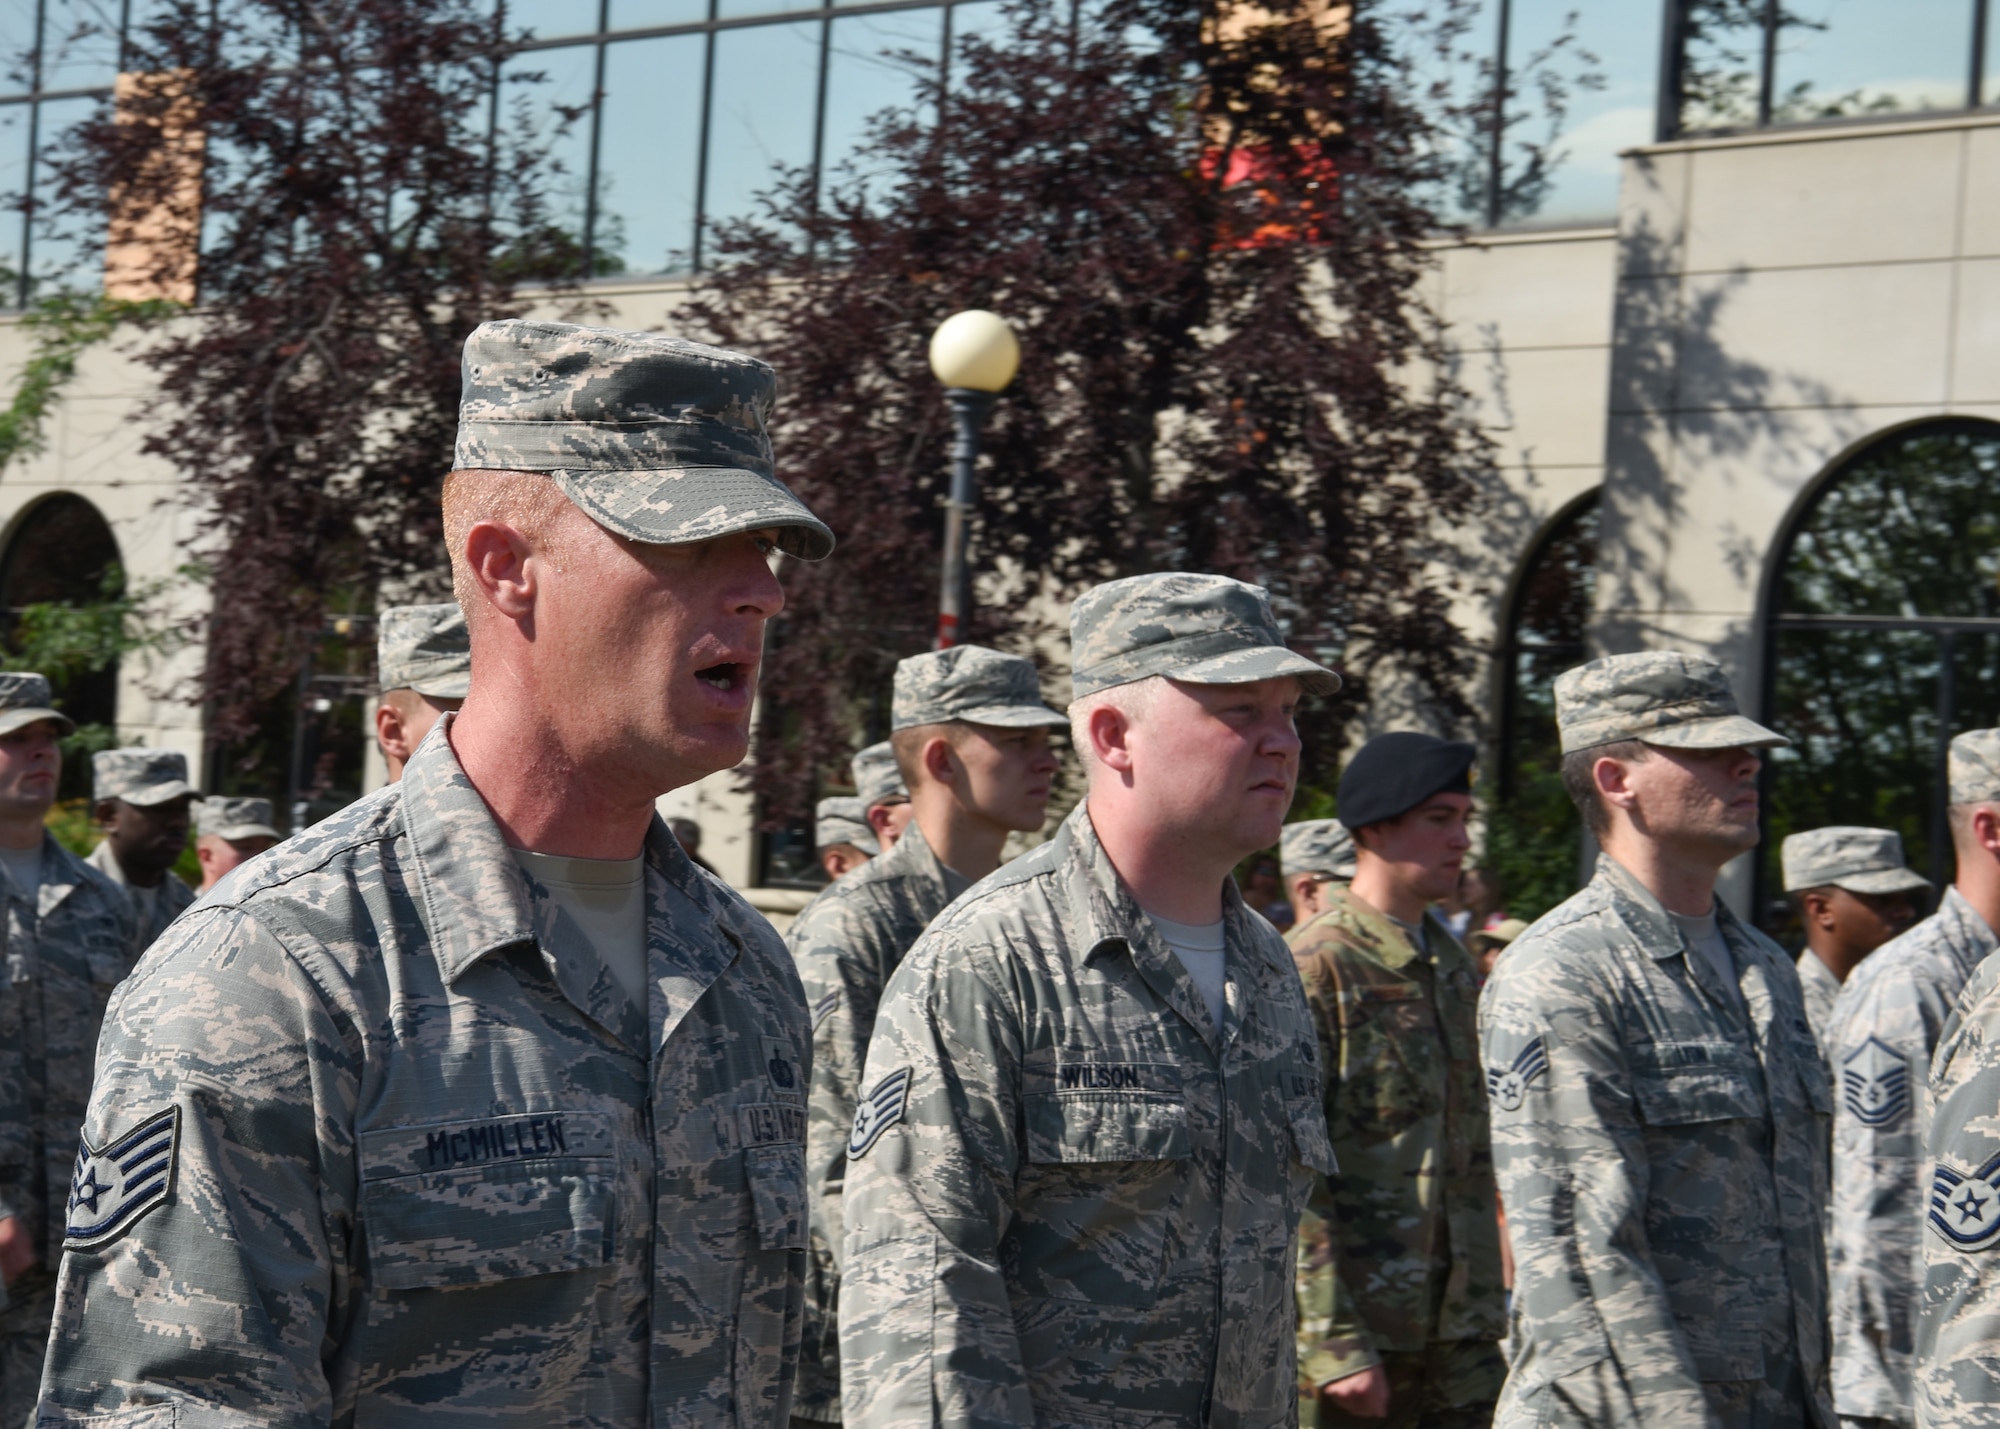 Staff Sgt. Michael McMillen, 90th Force Support Squadron fitness assessment cell manager, calls cadence for a flight of approximately 150 Airmen during the Grand Parade in Cheyenne, Wyo., July 21, 2018. The Grand Parade is part of the official kick-of event starting Cheyenne Frontier Days, the Daddy of ‘em All. The F.E. Warren Air Force Base and Cheyenne communities came together to celebrate the CFD rodeo and festival, which runs from July 20-29. (U.S. Air Force photo by Airman 1st Class Braydon Williams)